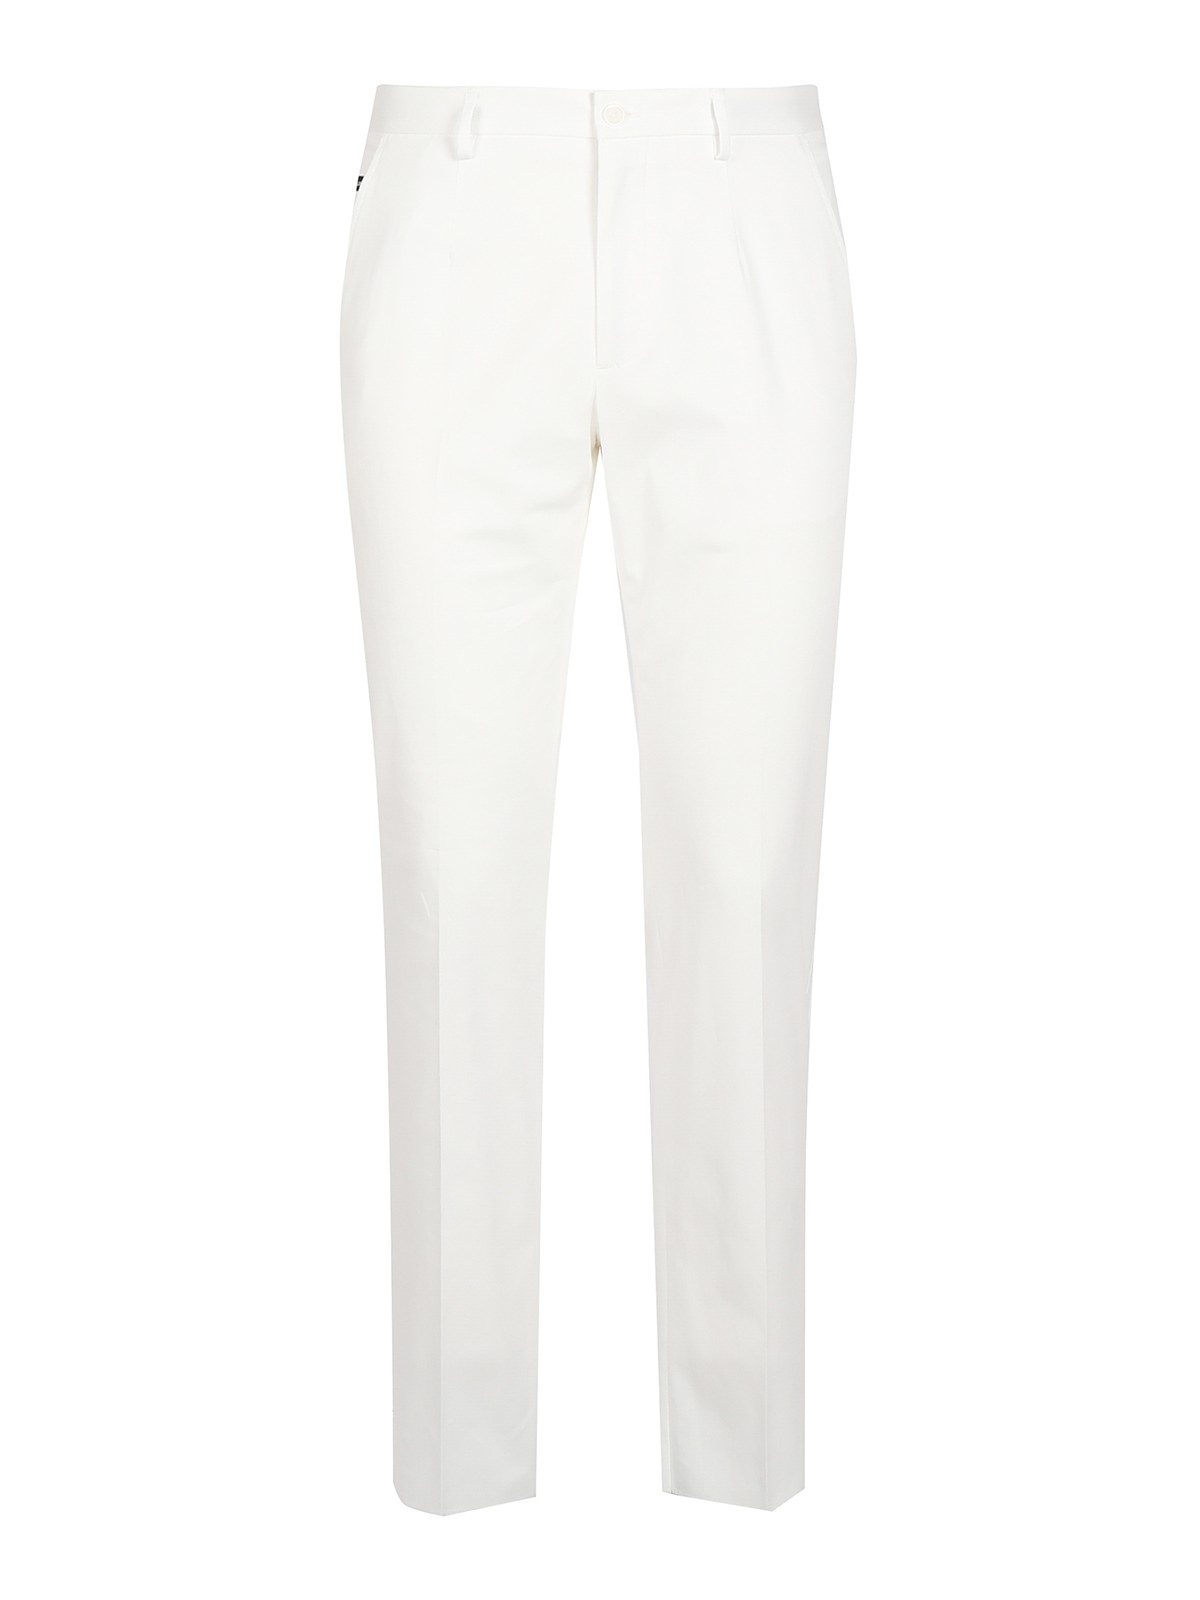 Dolce & Gabbana Logo Plaque Formal Trousers In White